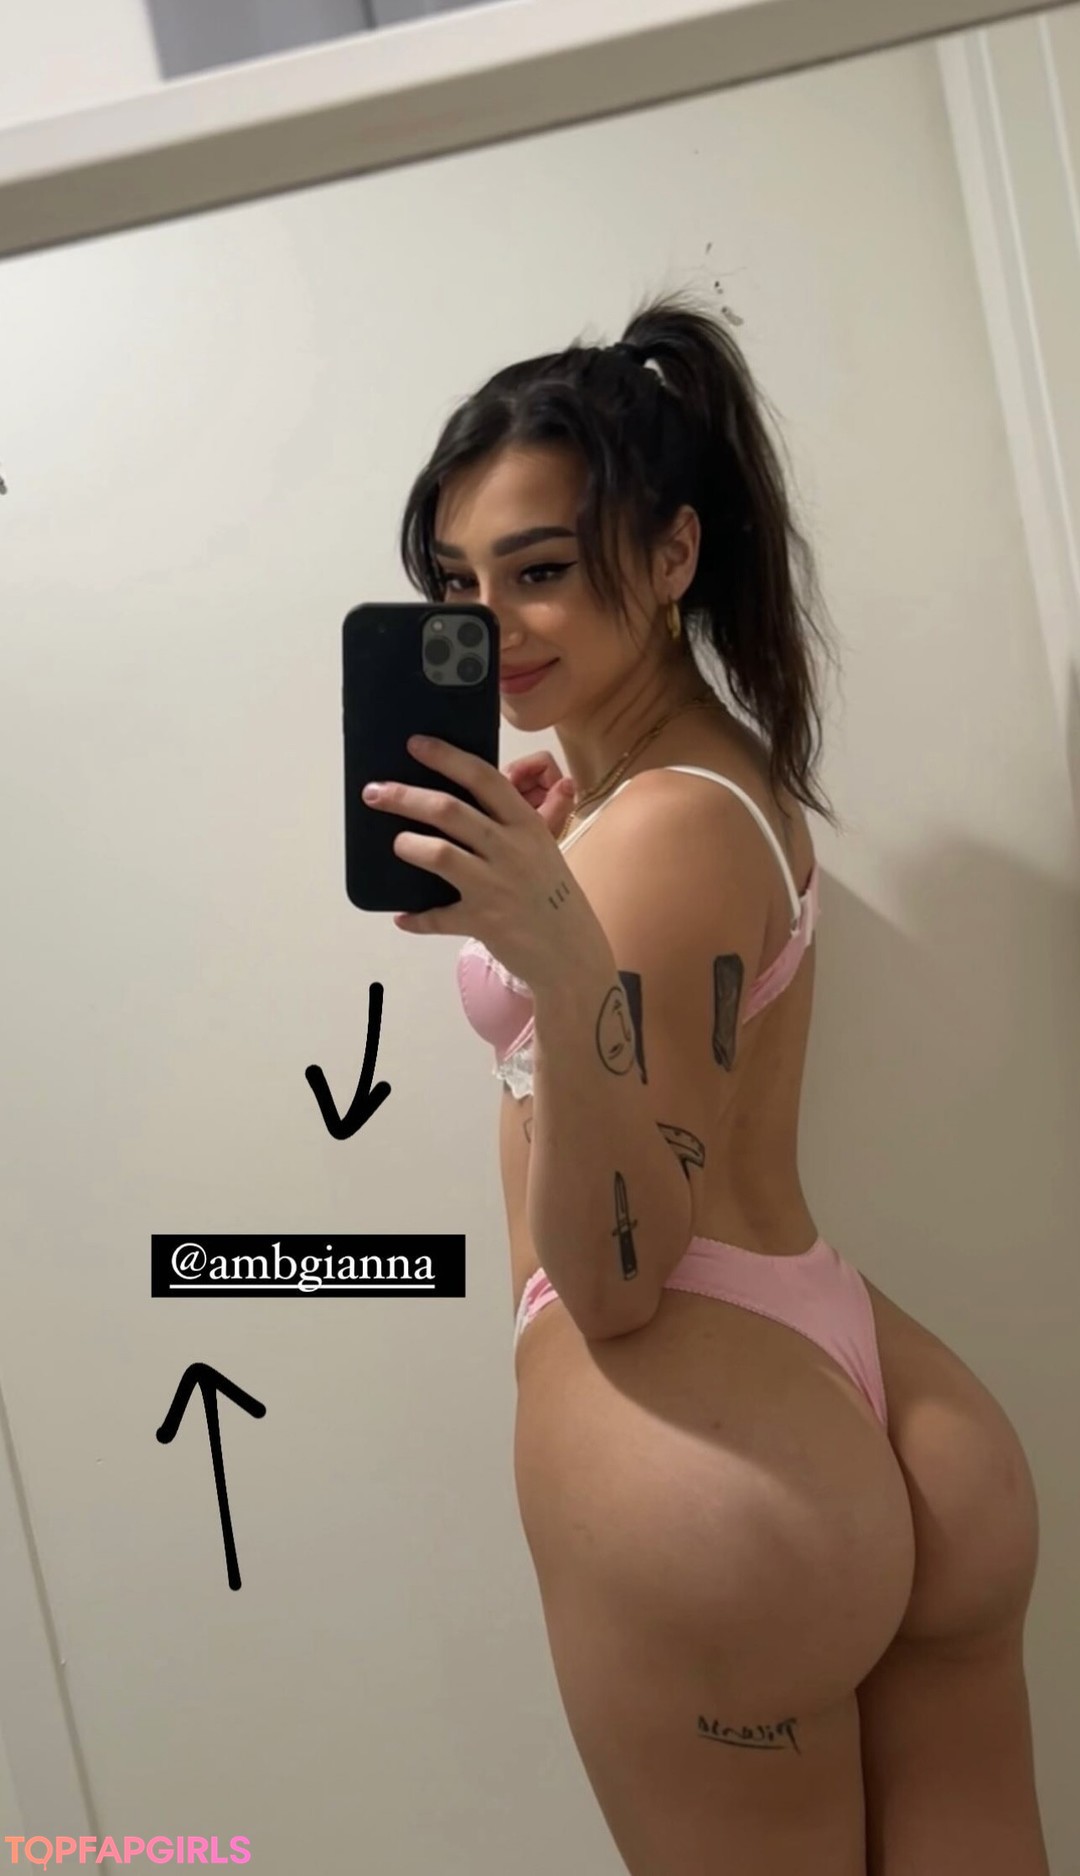 allison bigbie recommends amber gianna onlyfans pic